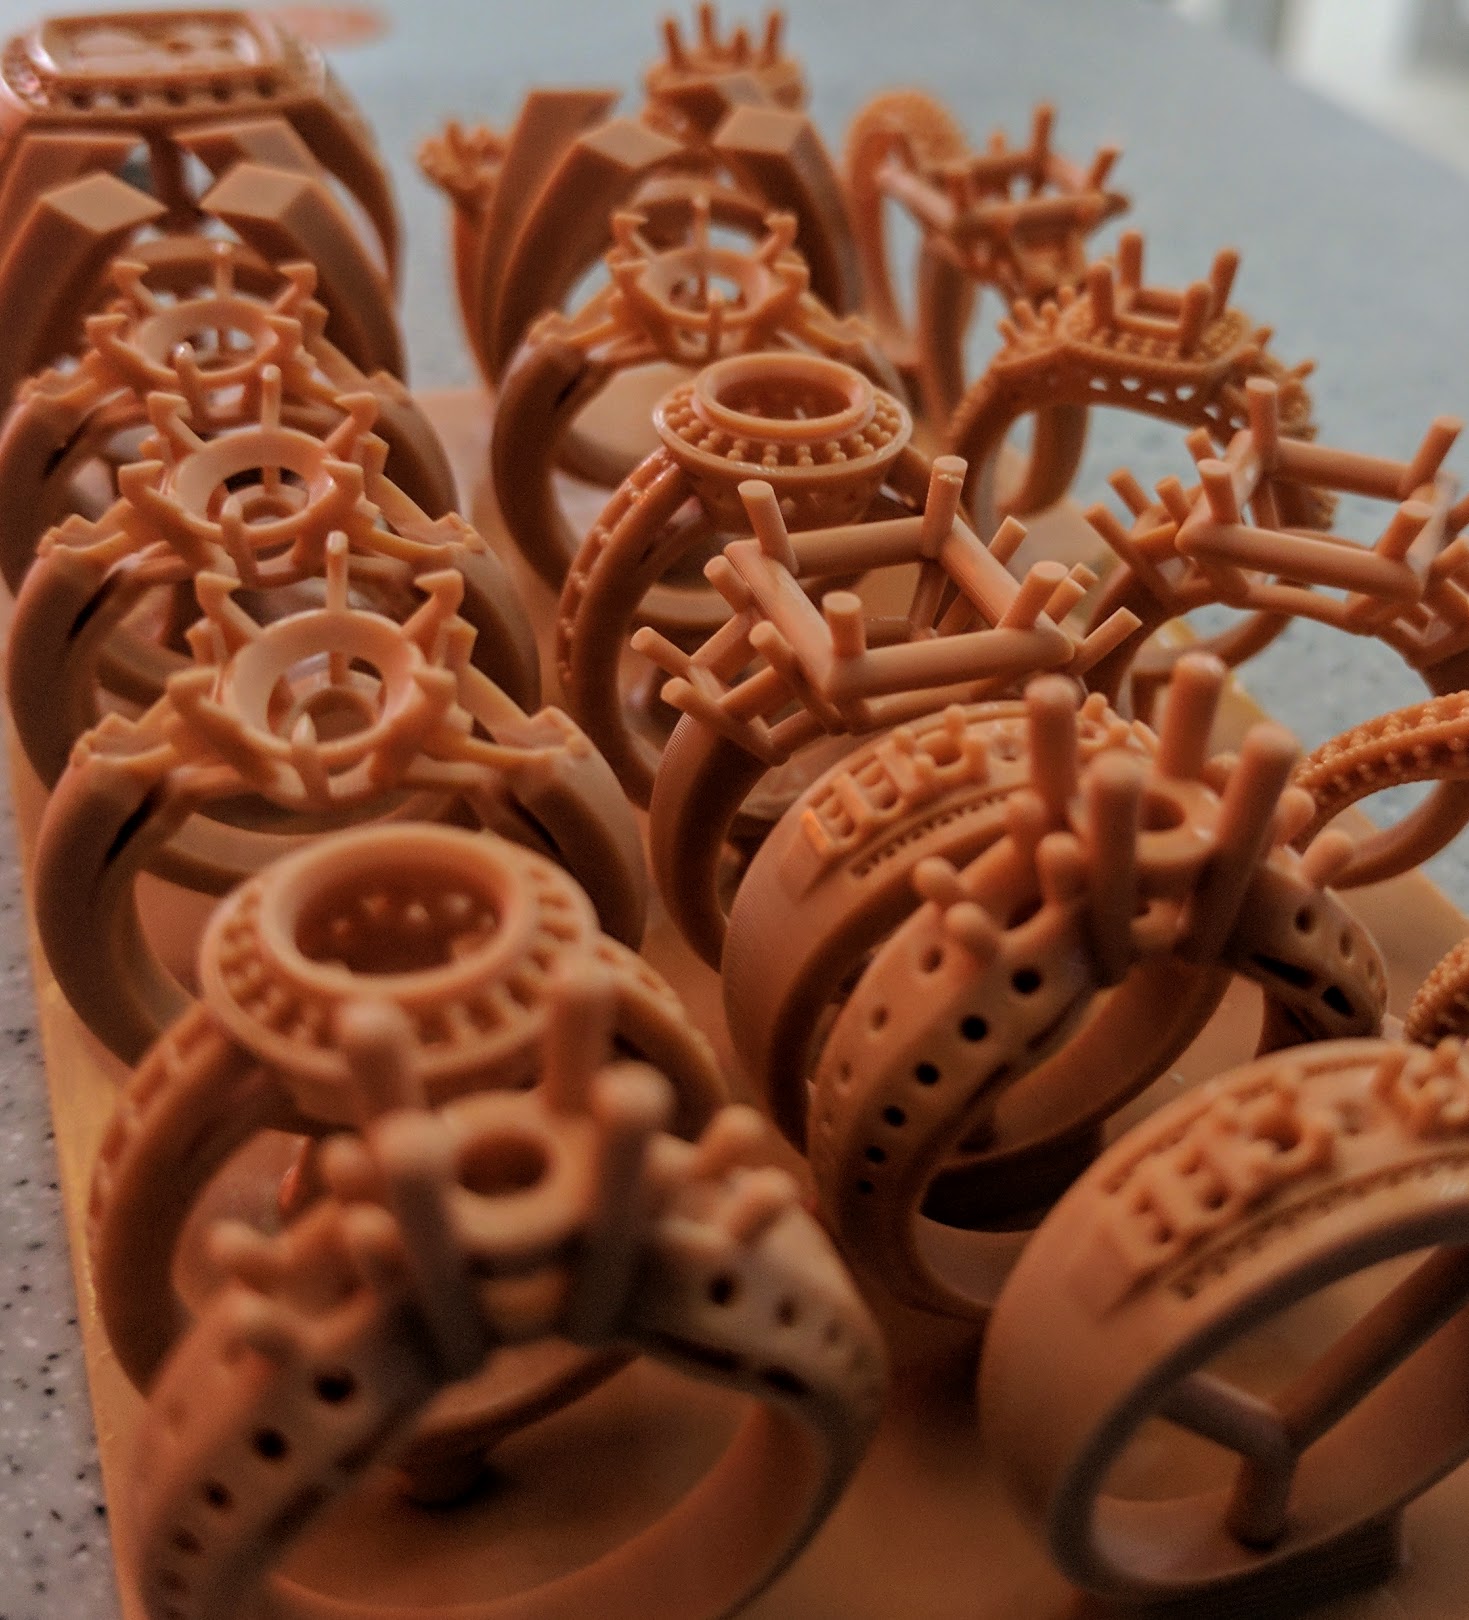 EnvisionTEC 3D printed jewelry molds. Photo by Michael Petch.